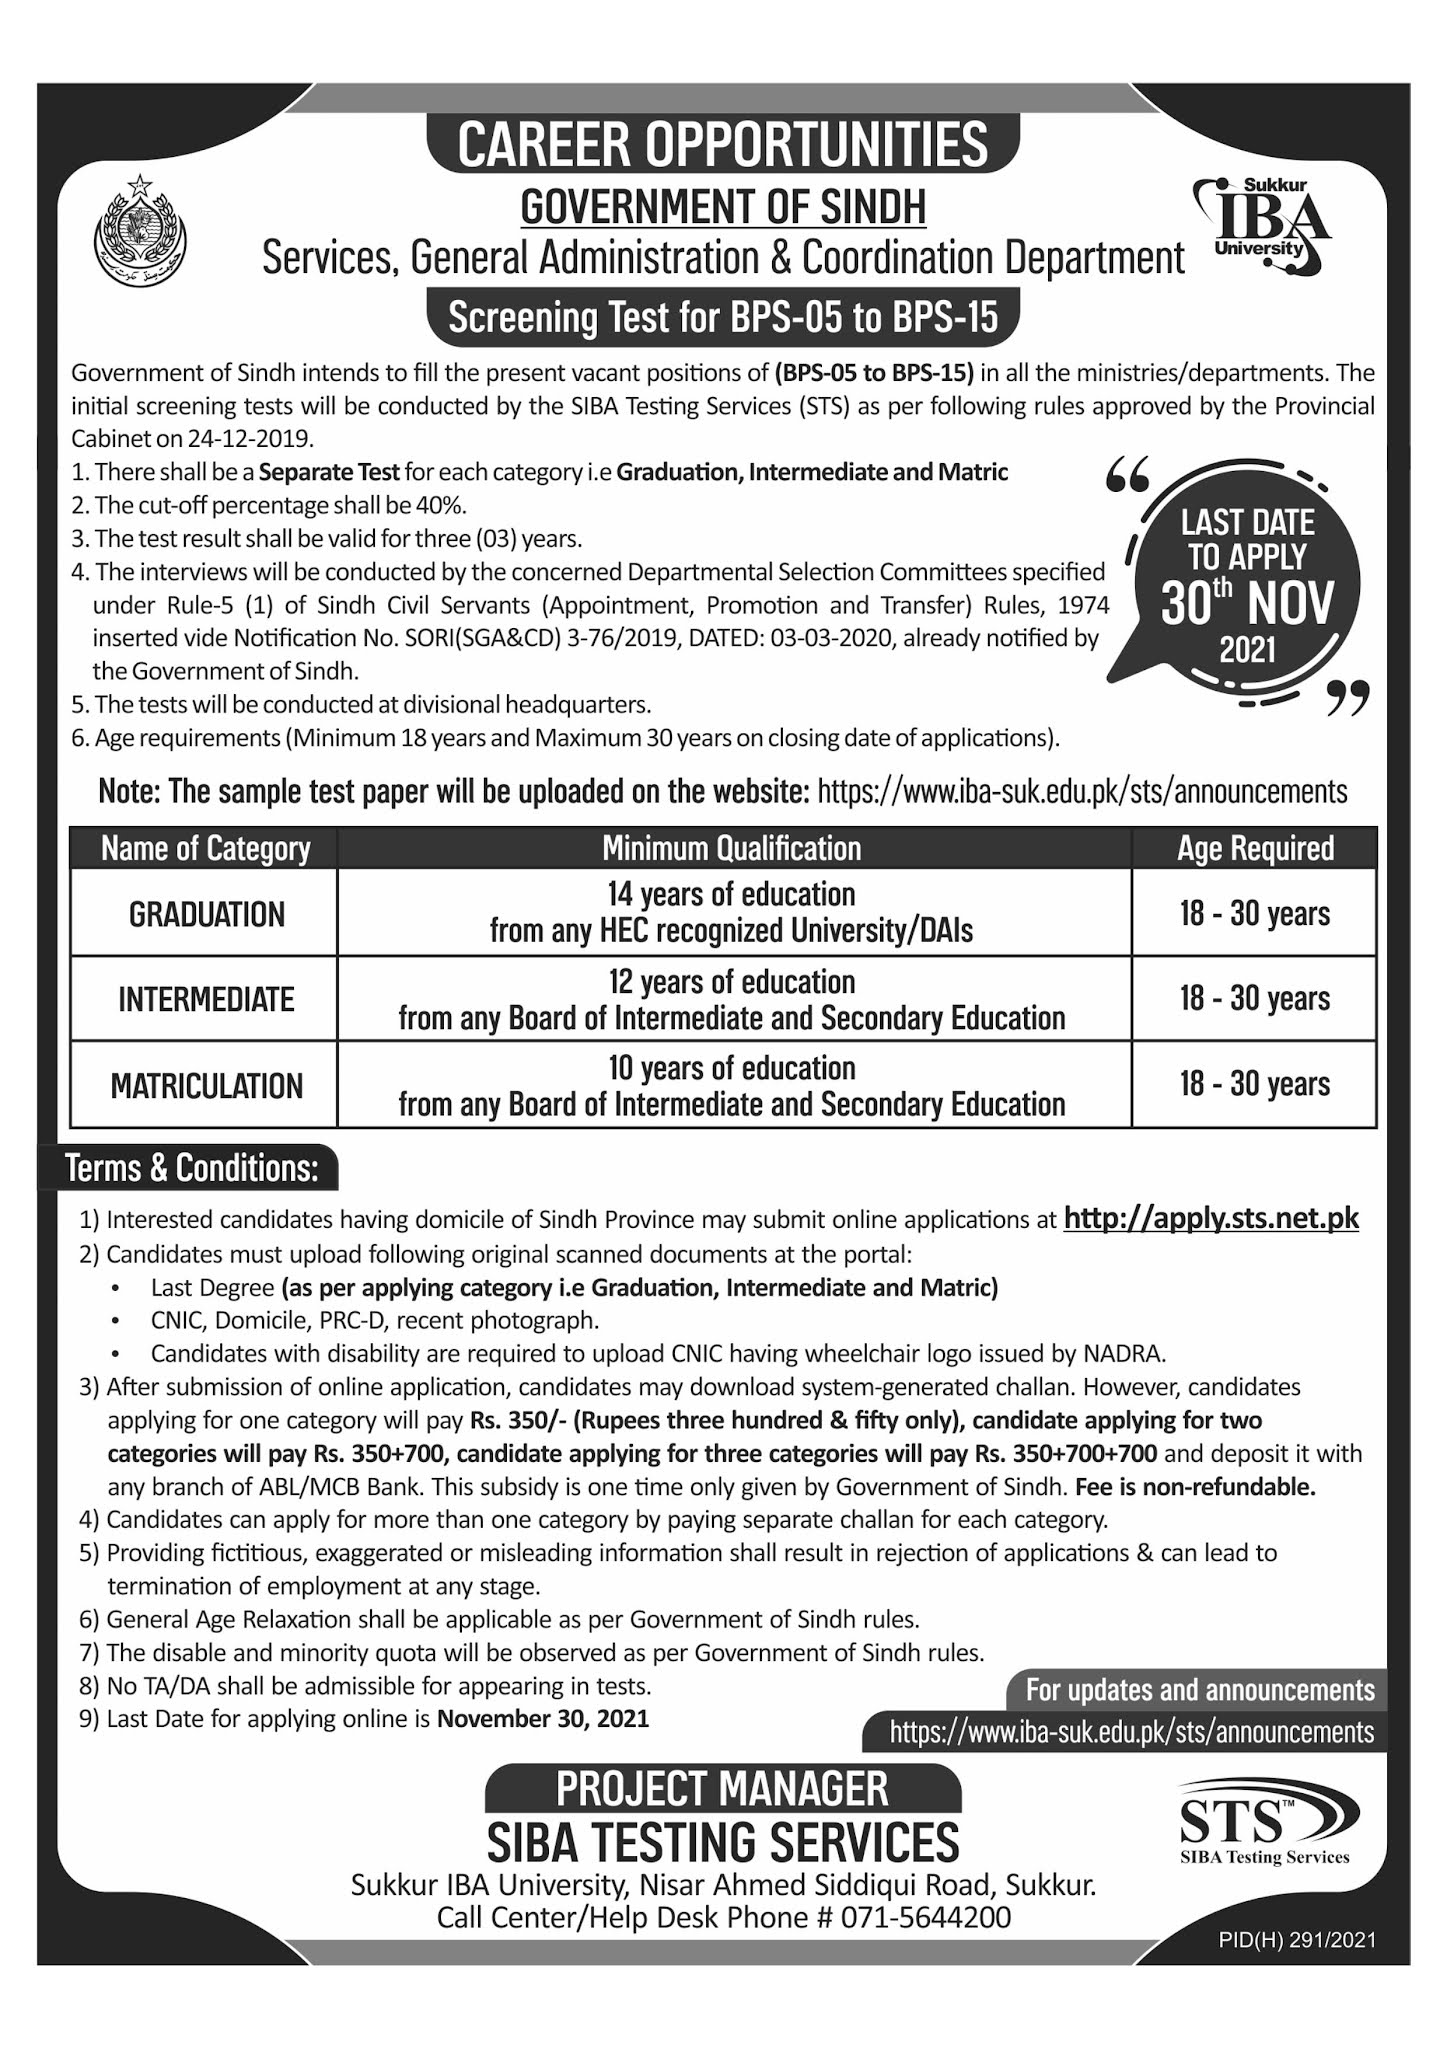 SINDH GOVERNMENT JOBS 2021